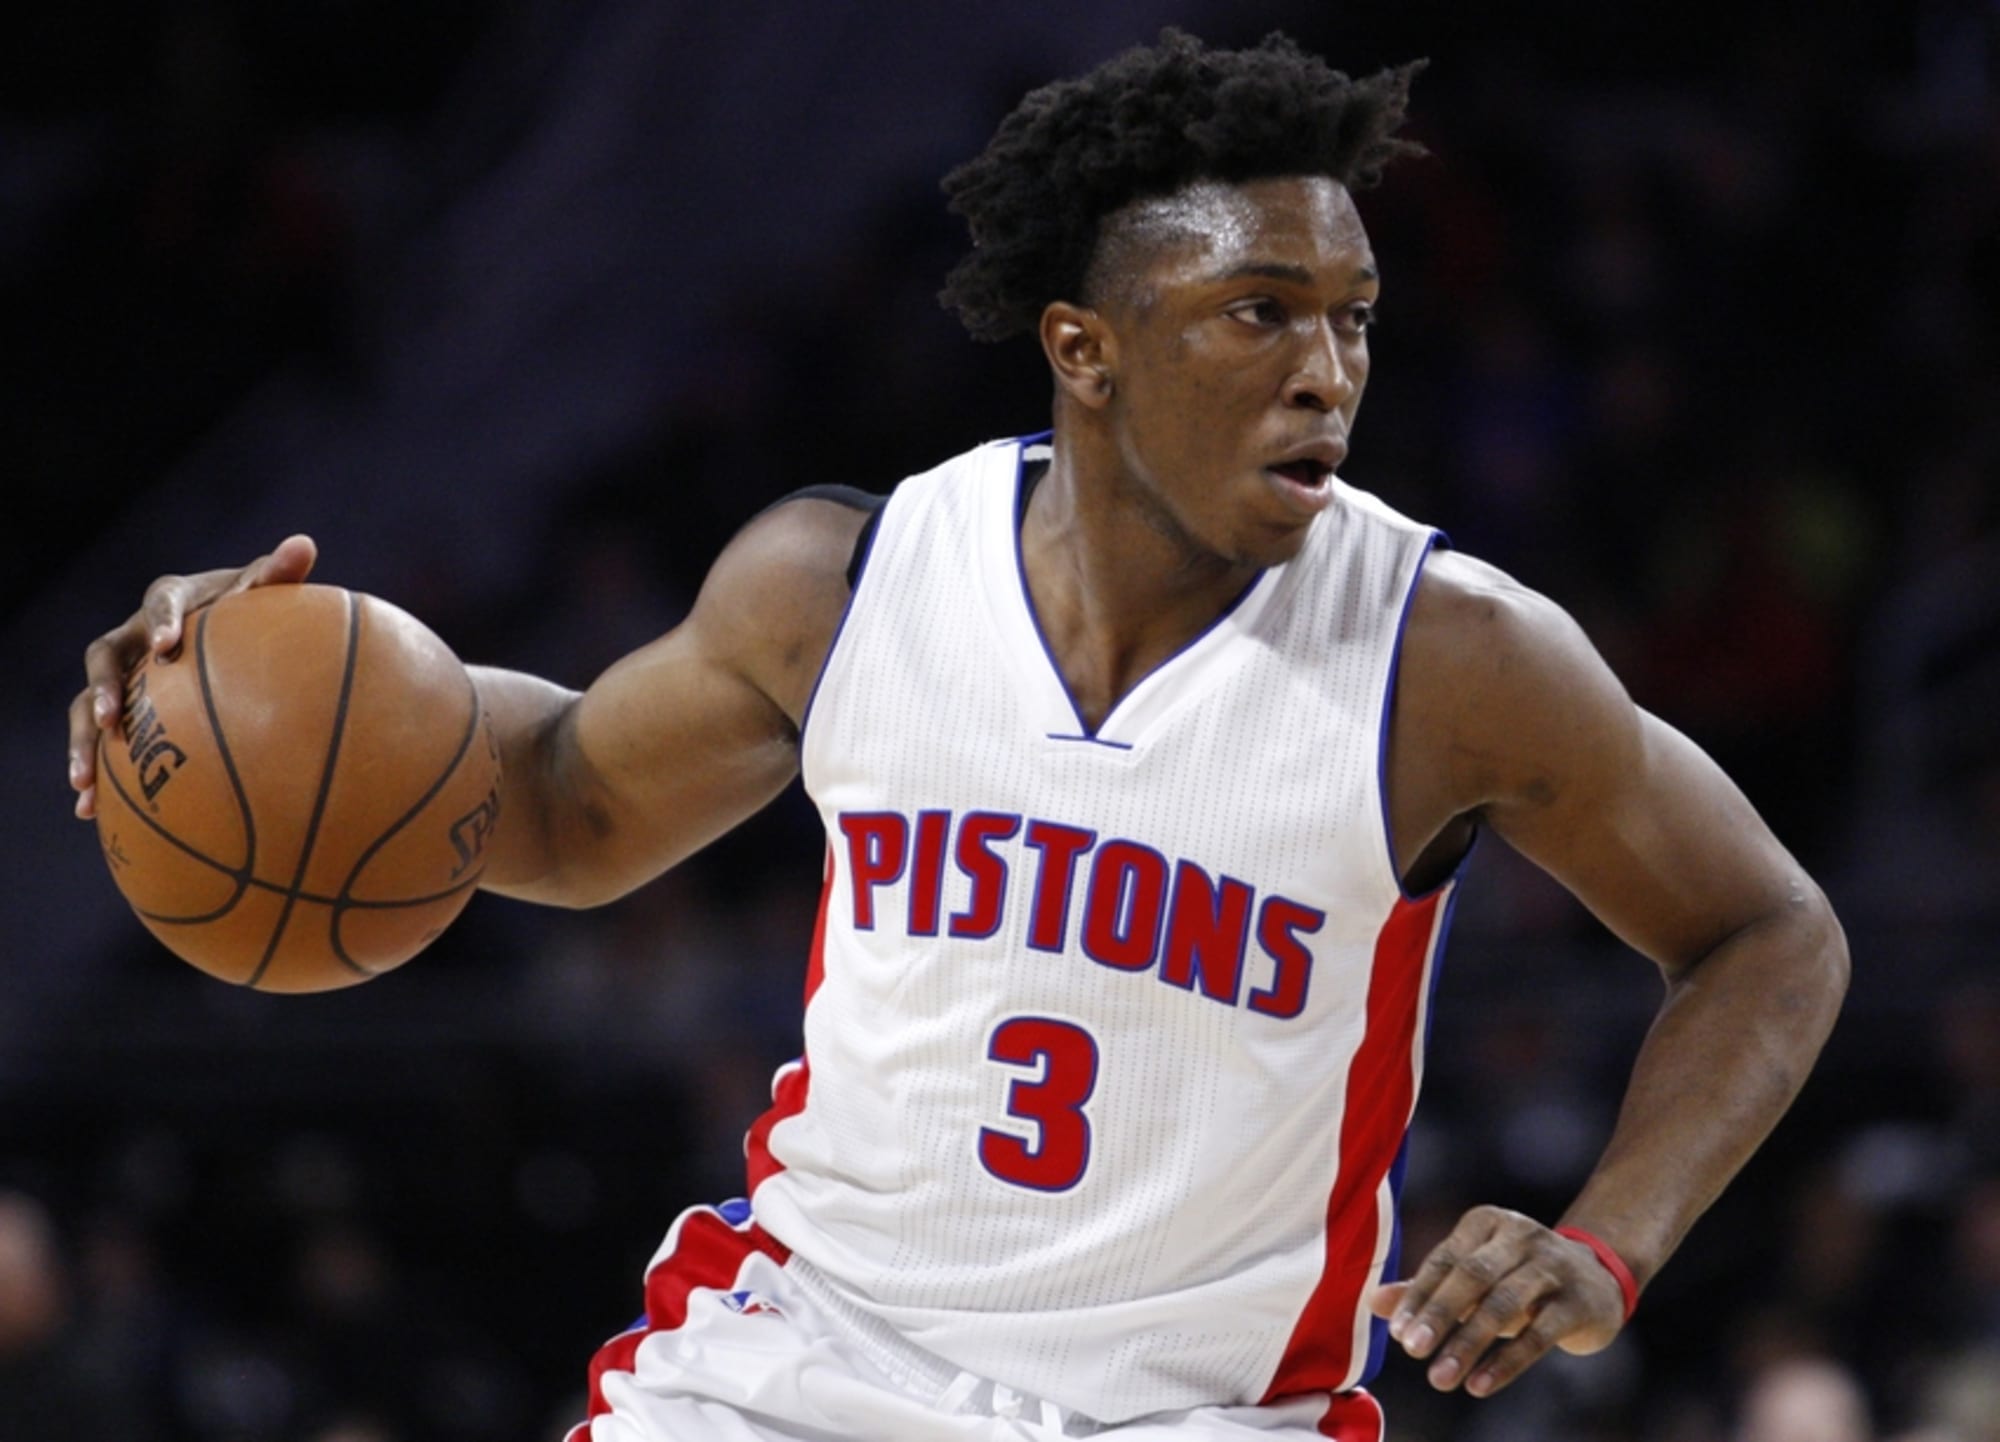 Detroit Pistons' Johnson, Jackson willing to switch jersey numbers